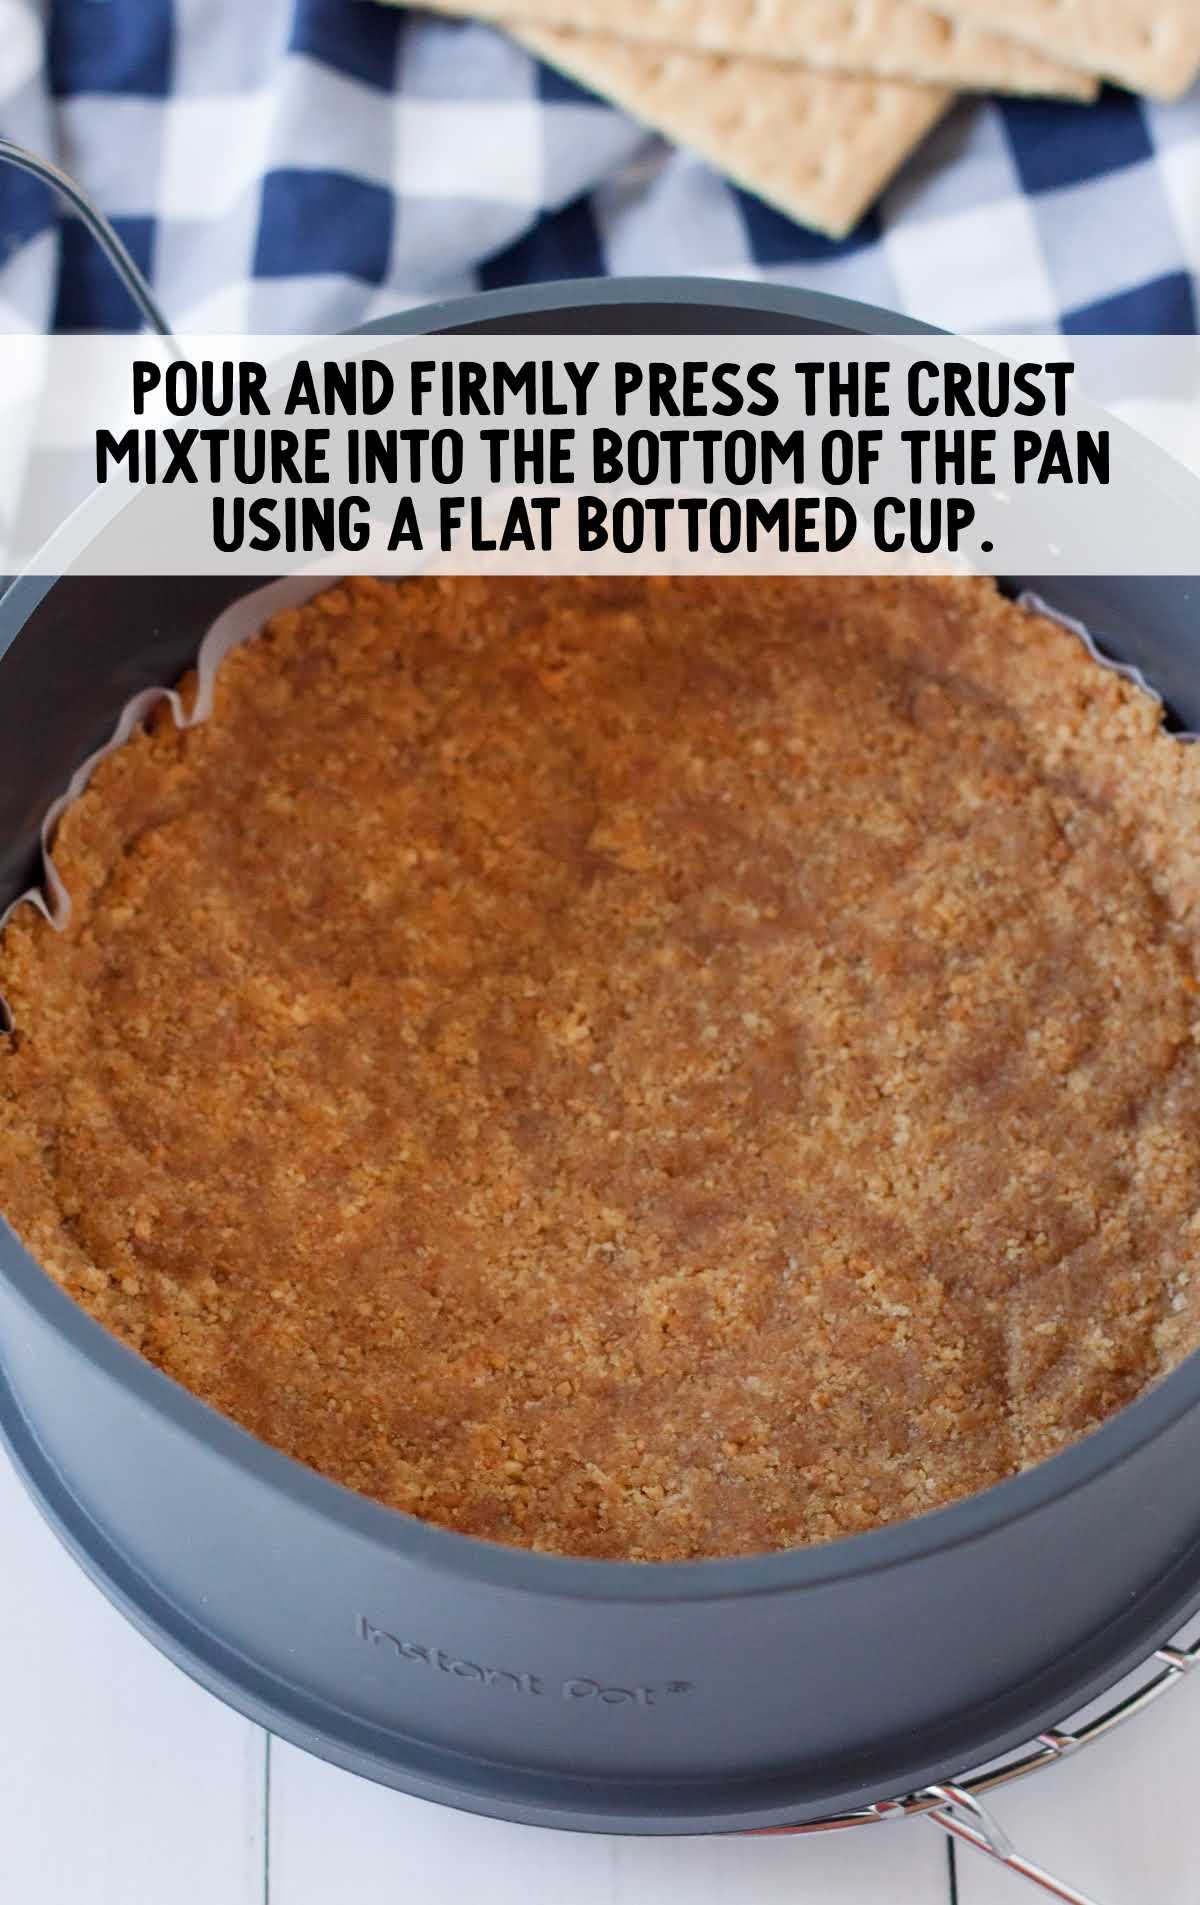 crust mixture placed on the bottom of the pan